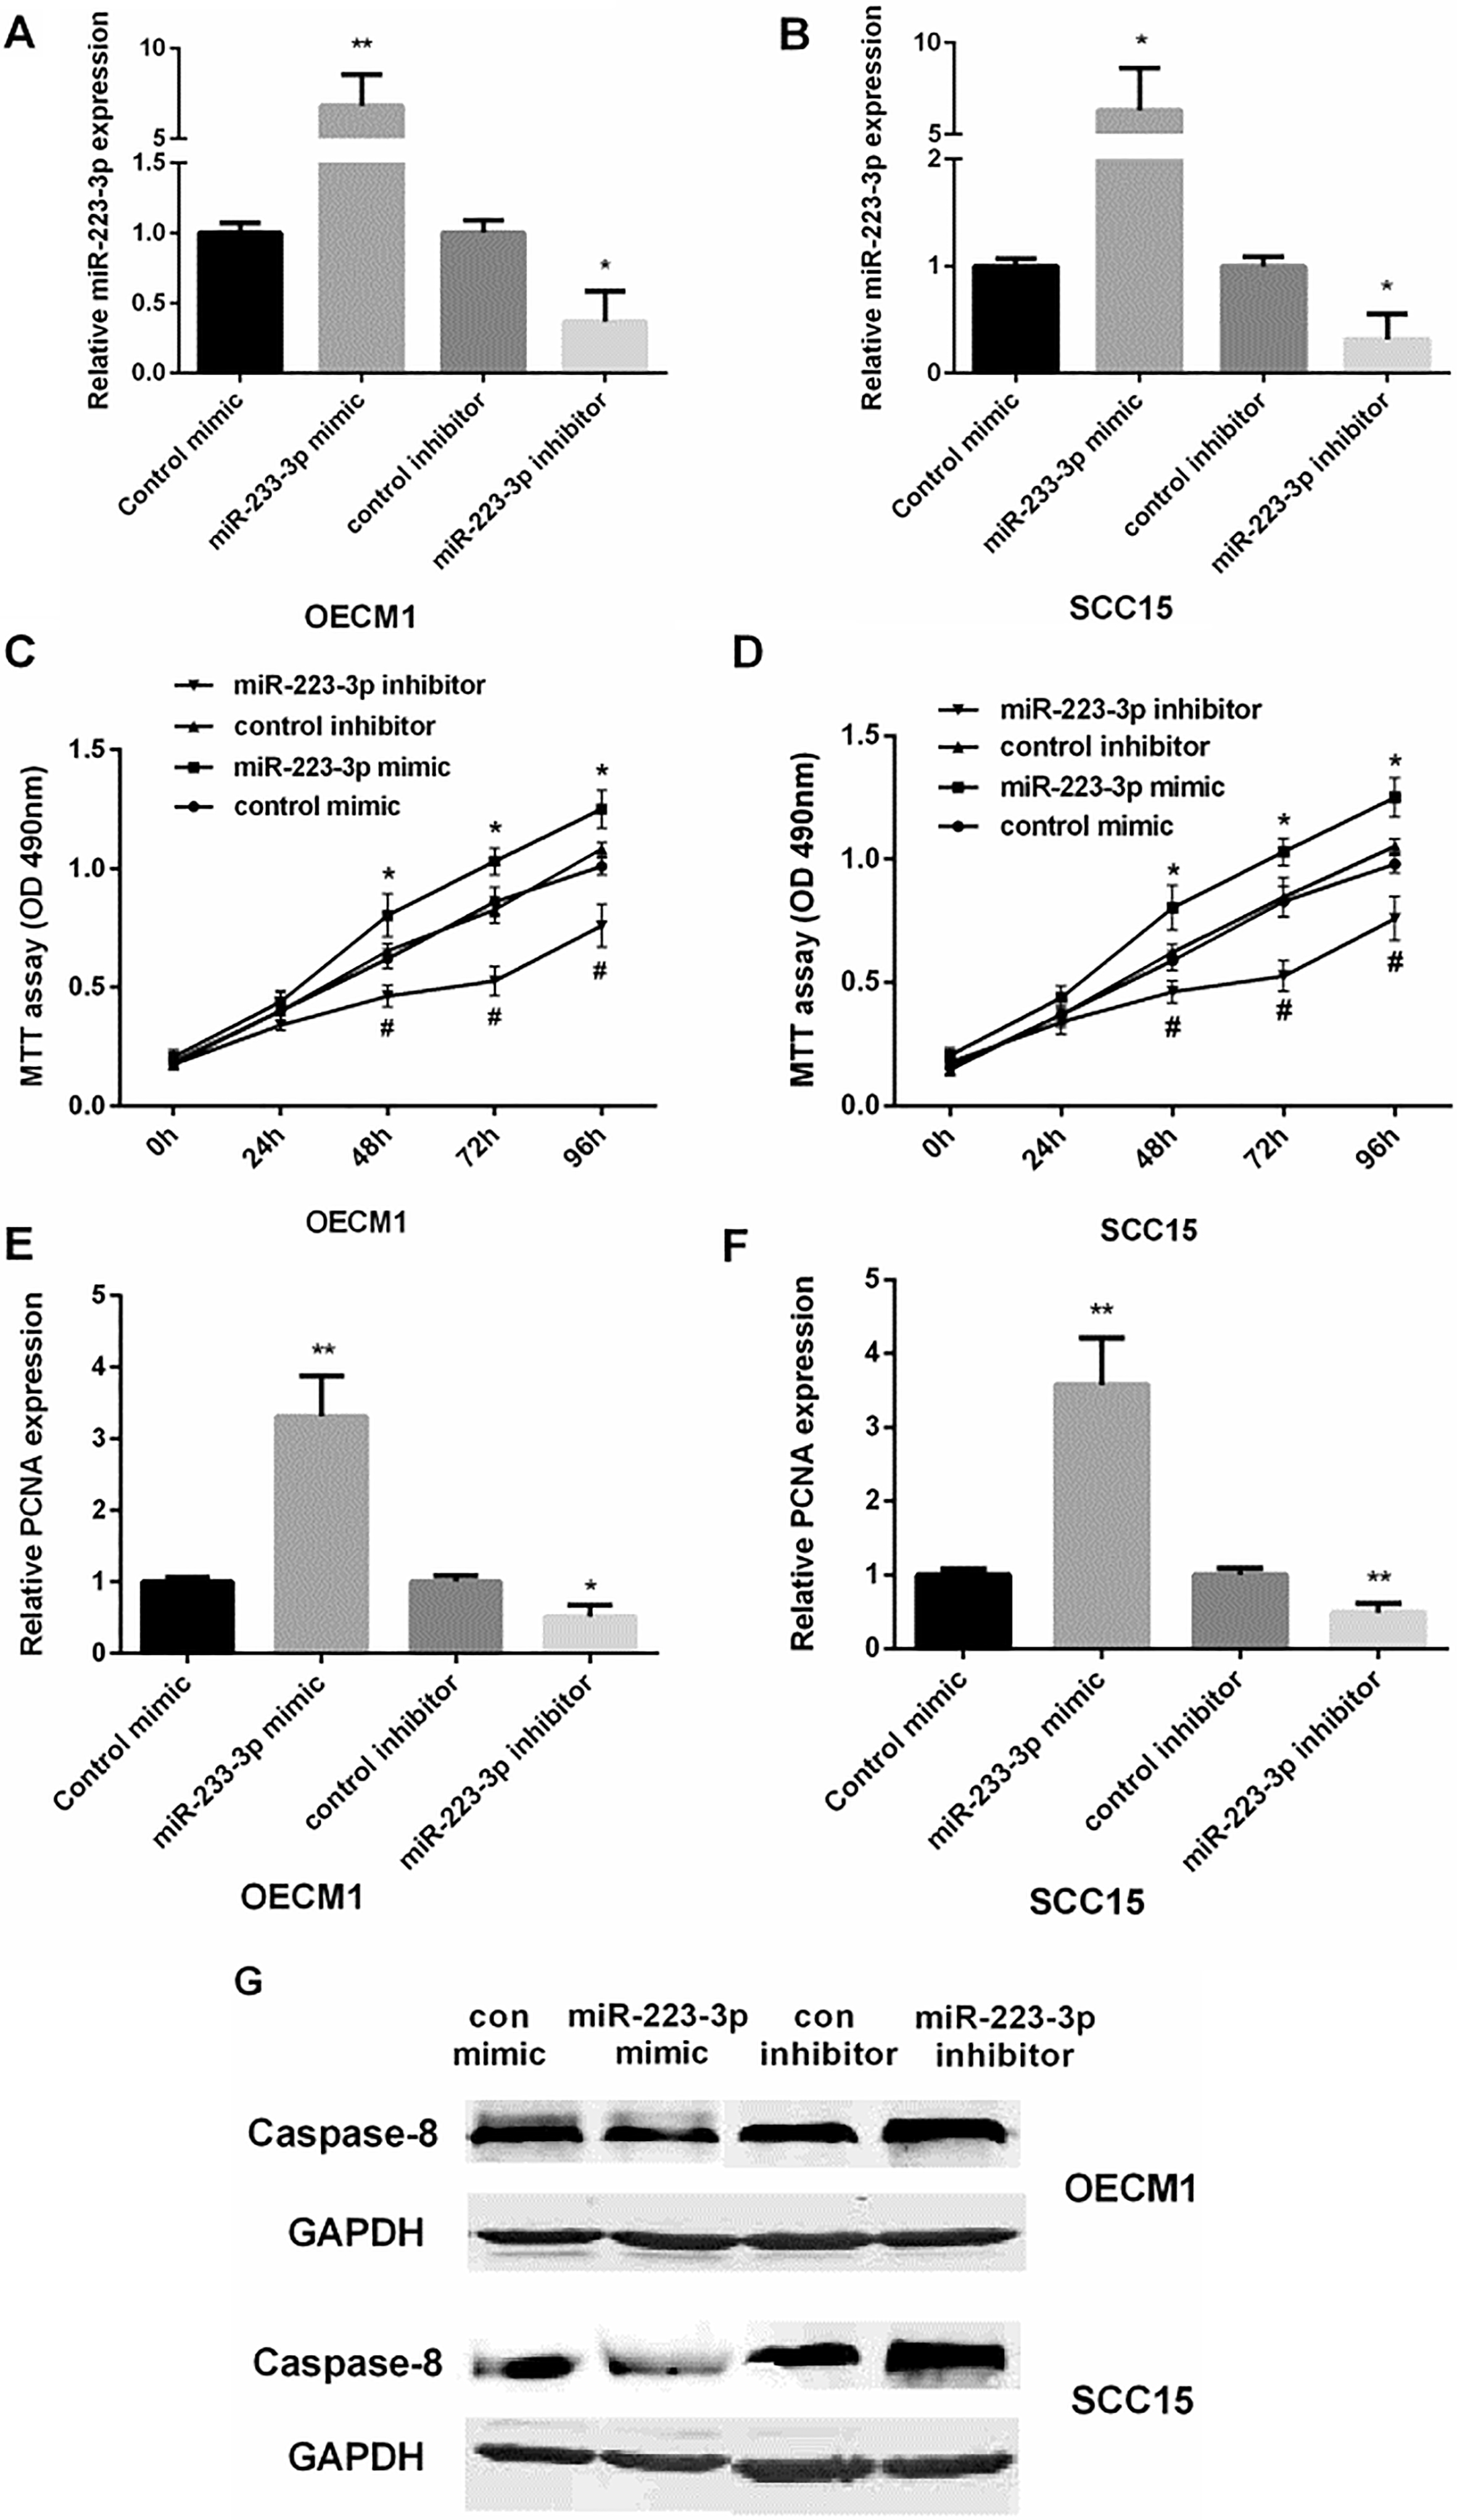 The promotion of miR-223 in the proliferation and apoptosis of OSCC cells. (A and B) Detection of the relative miR-223 mRNA expression in OECM1 and SCC15 cell lines after transfected with control mimic/inhibitor or miR-223 mimic/inhibitor (P*< 0.05, P**< 0.01). (C and D) Detection of cell viability by MTT assay after the OECM1 and SCC15 cells lines transfected for 0, 24, 48, 72, 96 h with control mimic/inhibitor or miR-223 mimic/inhibitor (P#< 0.05, P*< 0.05). (E and F) Detection of the relative PCNA mRNA level after the OECM1 and SCC15 cell lines transfected with control mimic/inhibitor or miR-223 mimic/inhibitor by qRT-PCR. (G) Detection of Caspase-8 protein level after the OECM1 and SCC15 cell lines transfected with control mimic/inhibitor or miR-223 mimic/inhibitor by western blot (P*< 0.05, P**< 0.01). The experiments were repeated three times.